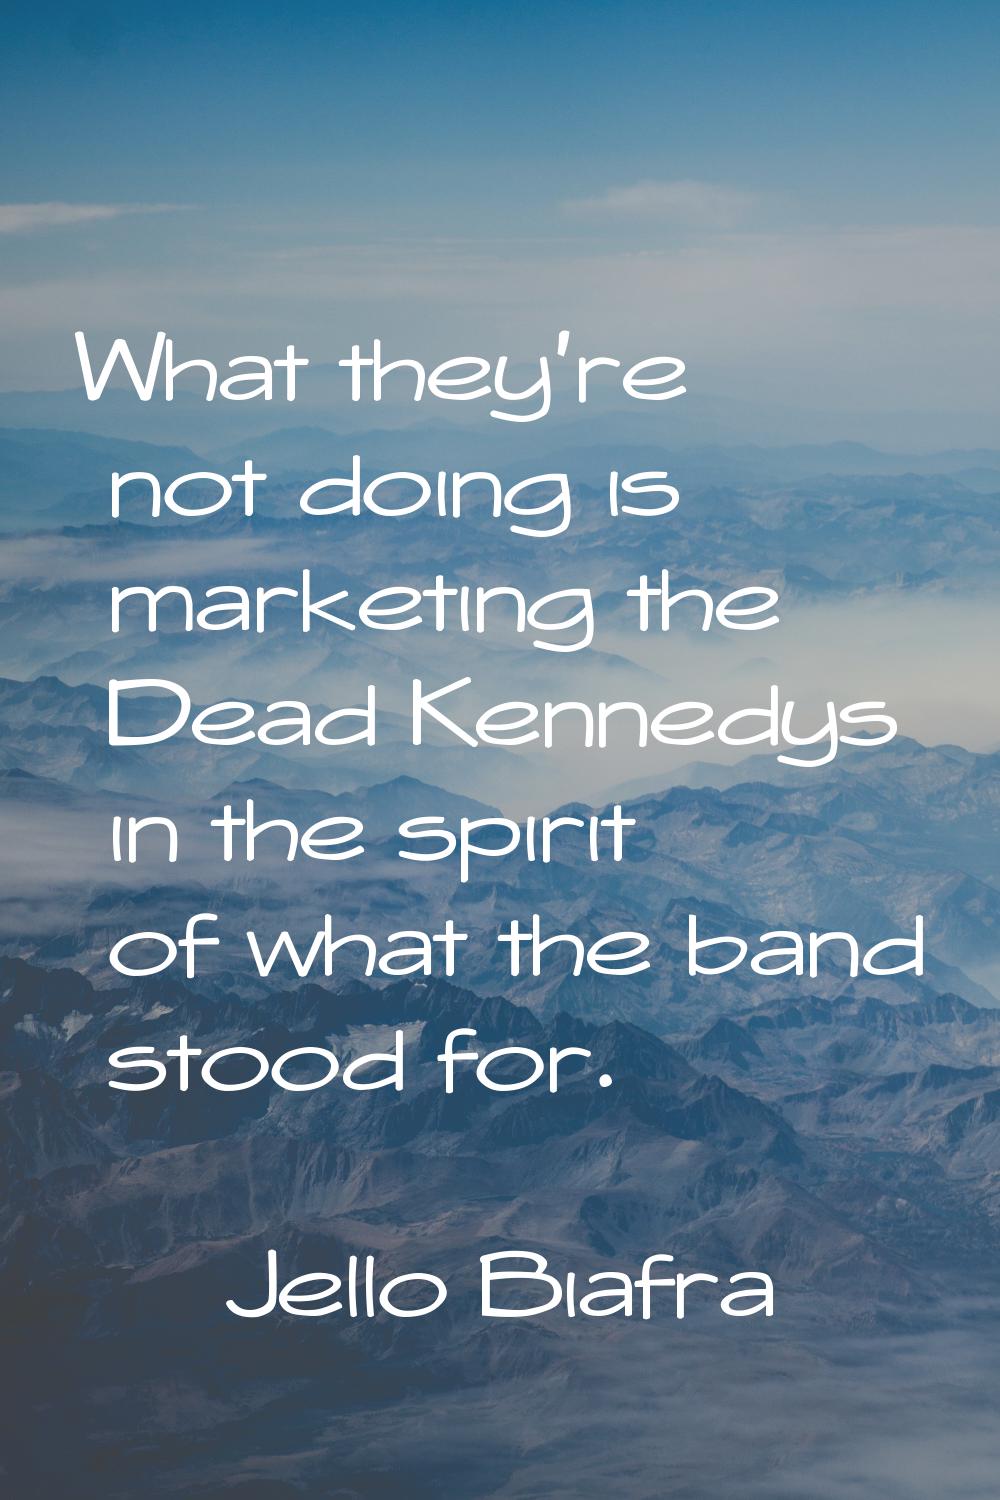 What they're not doing is marketing the Dead Kennedys in the spirit of what the band stood for.